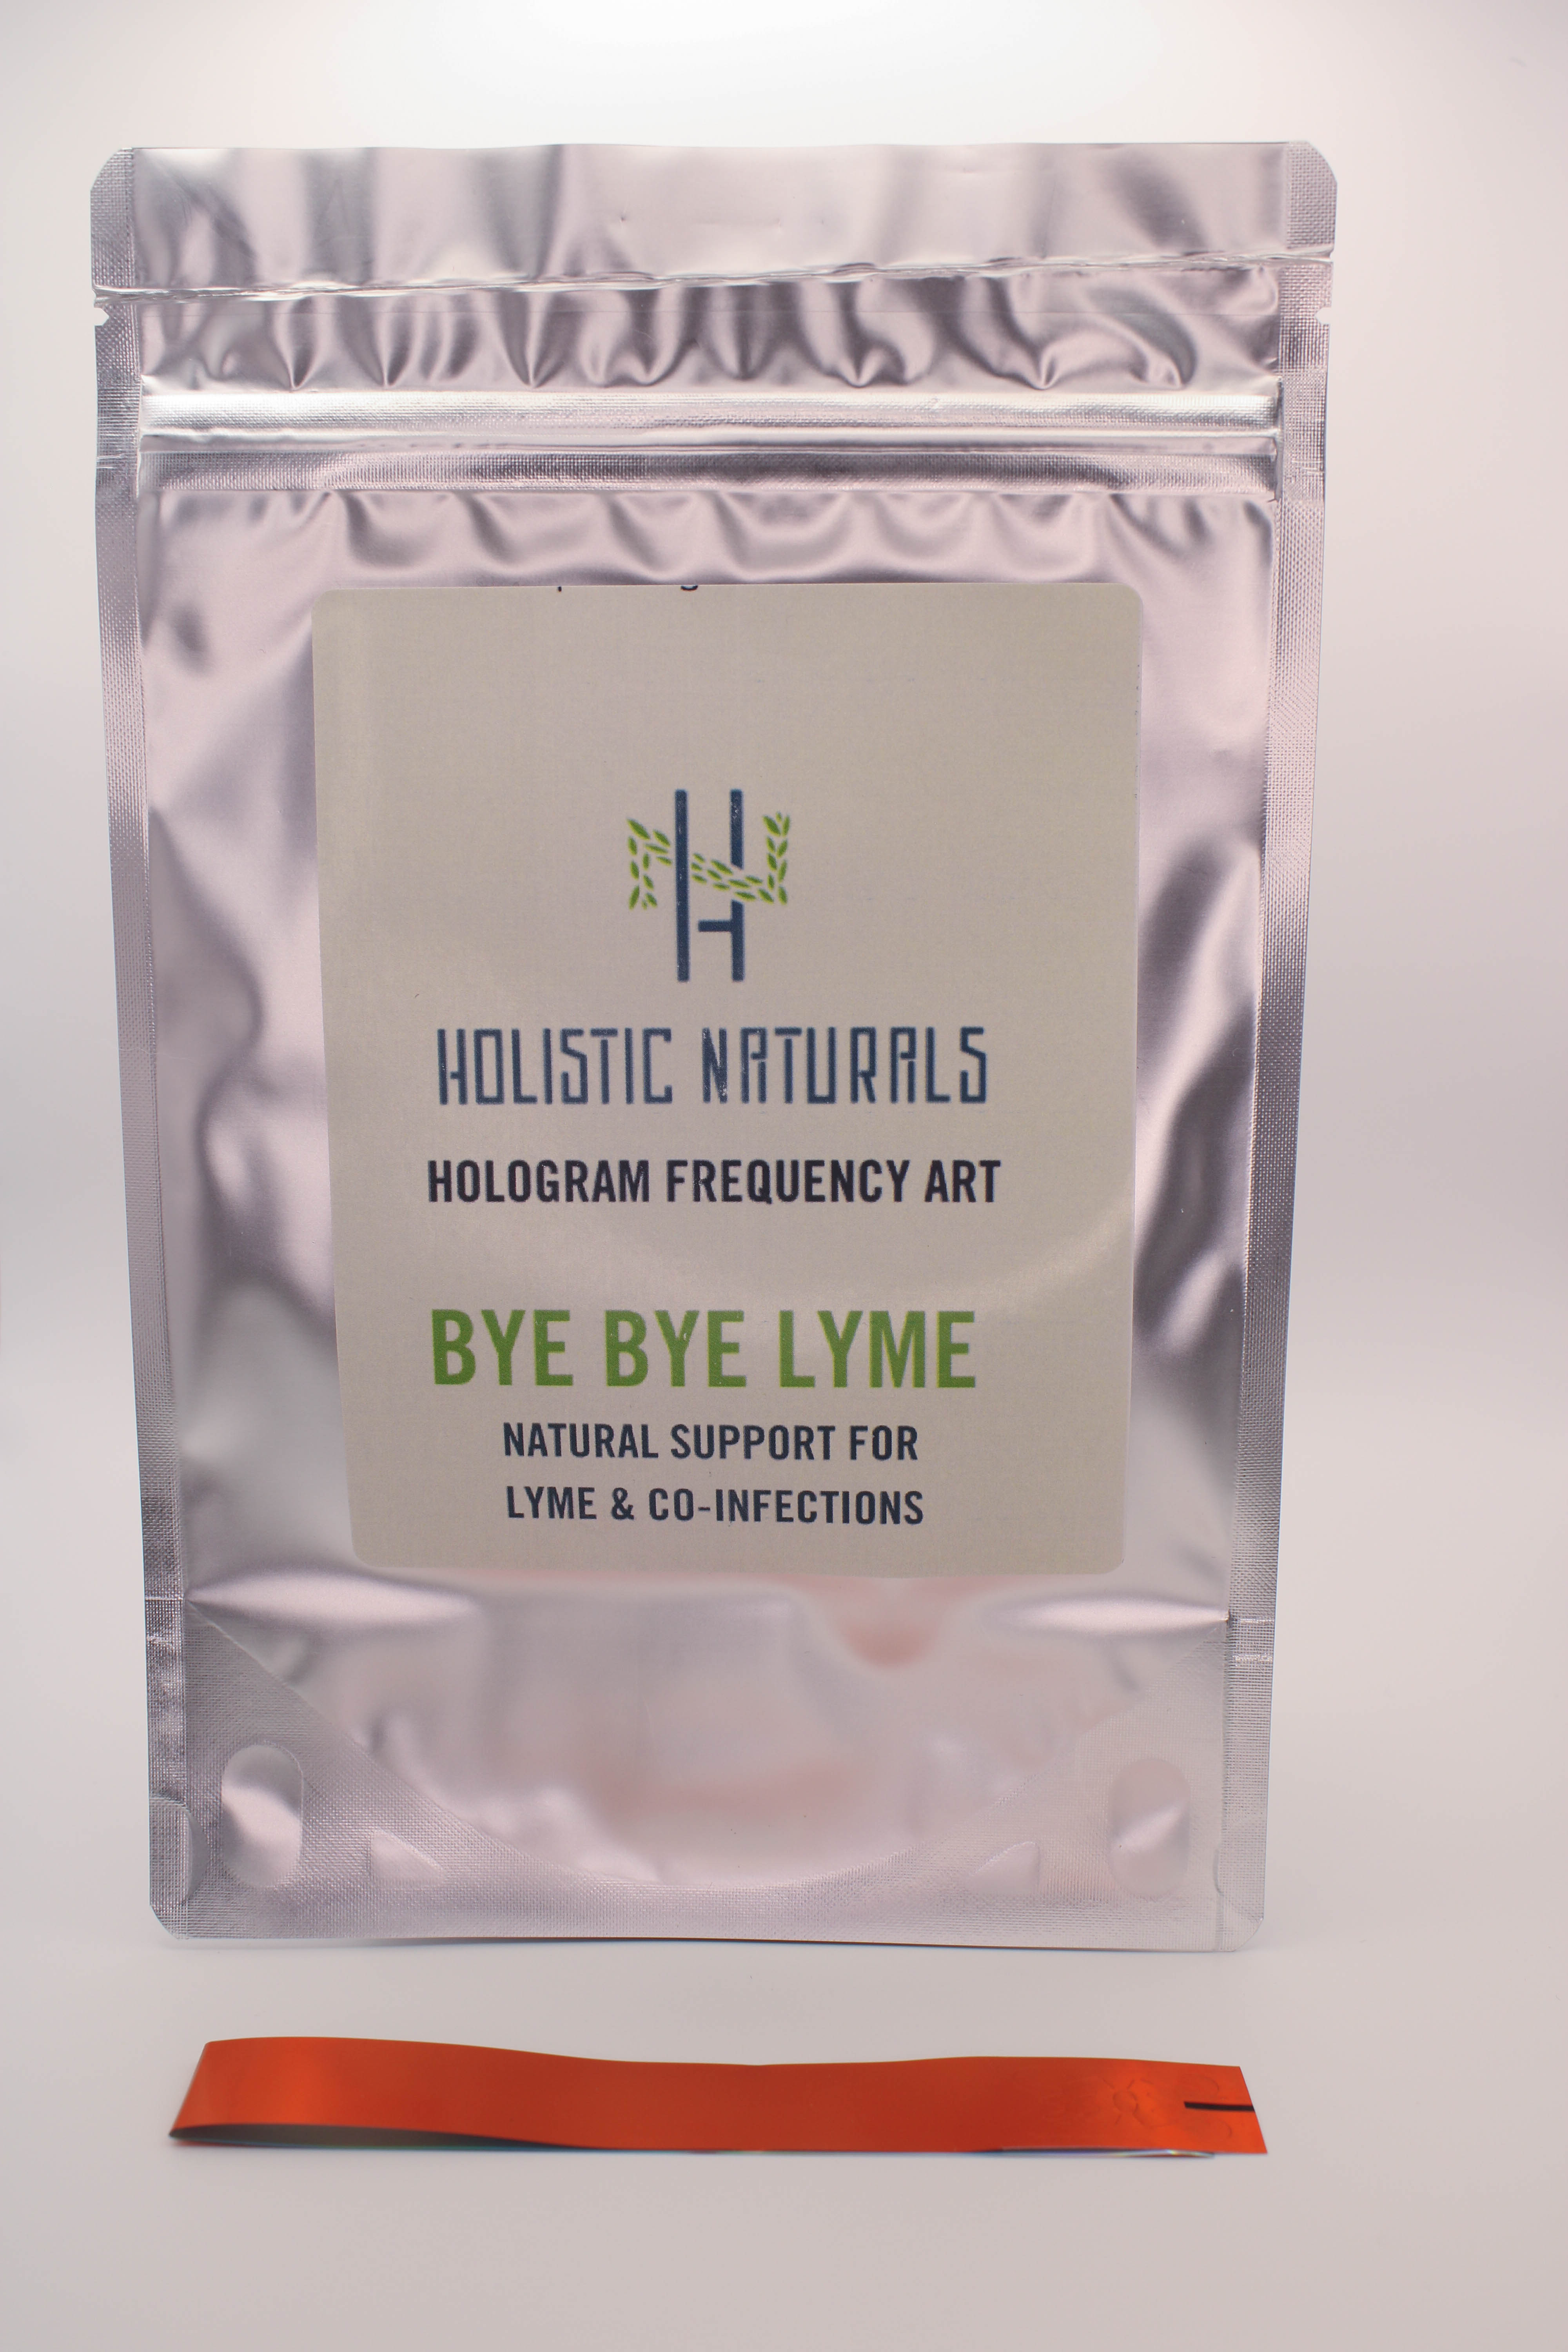 Bye Bye Lyme Holographic Frequency Art - 5 Pack